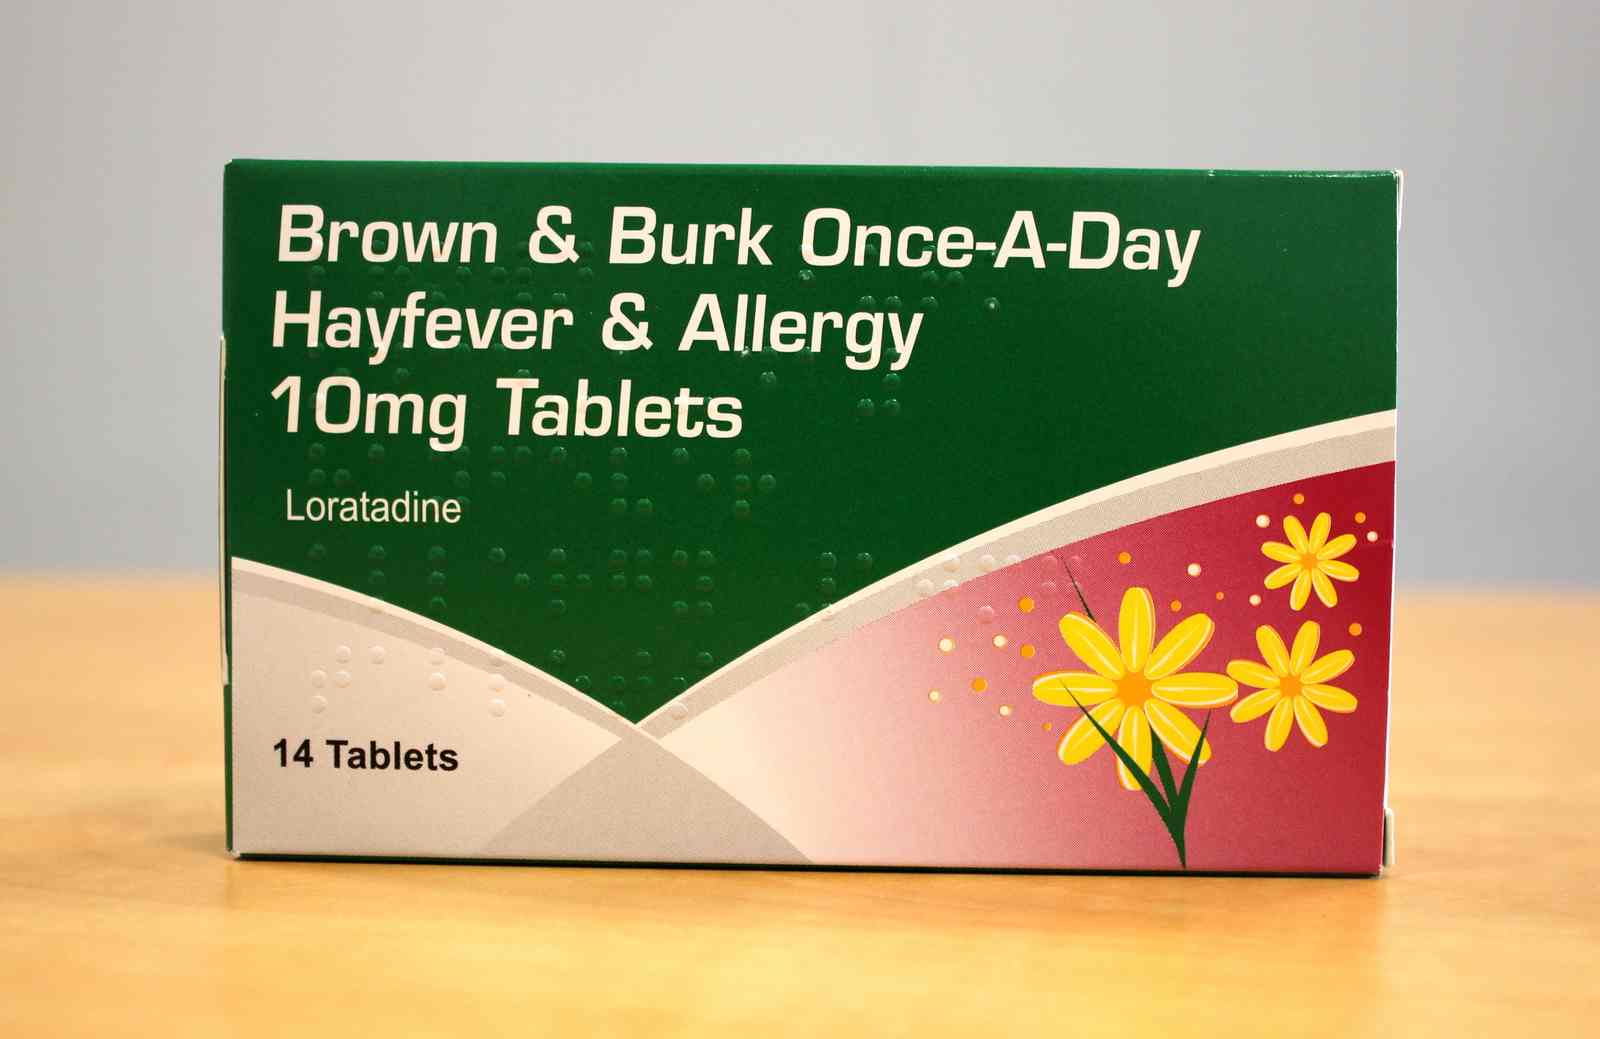 Once -A-Day Hayfever & Allergy 10 mg Tablets